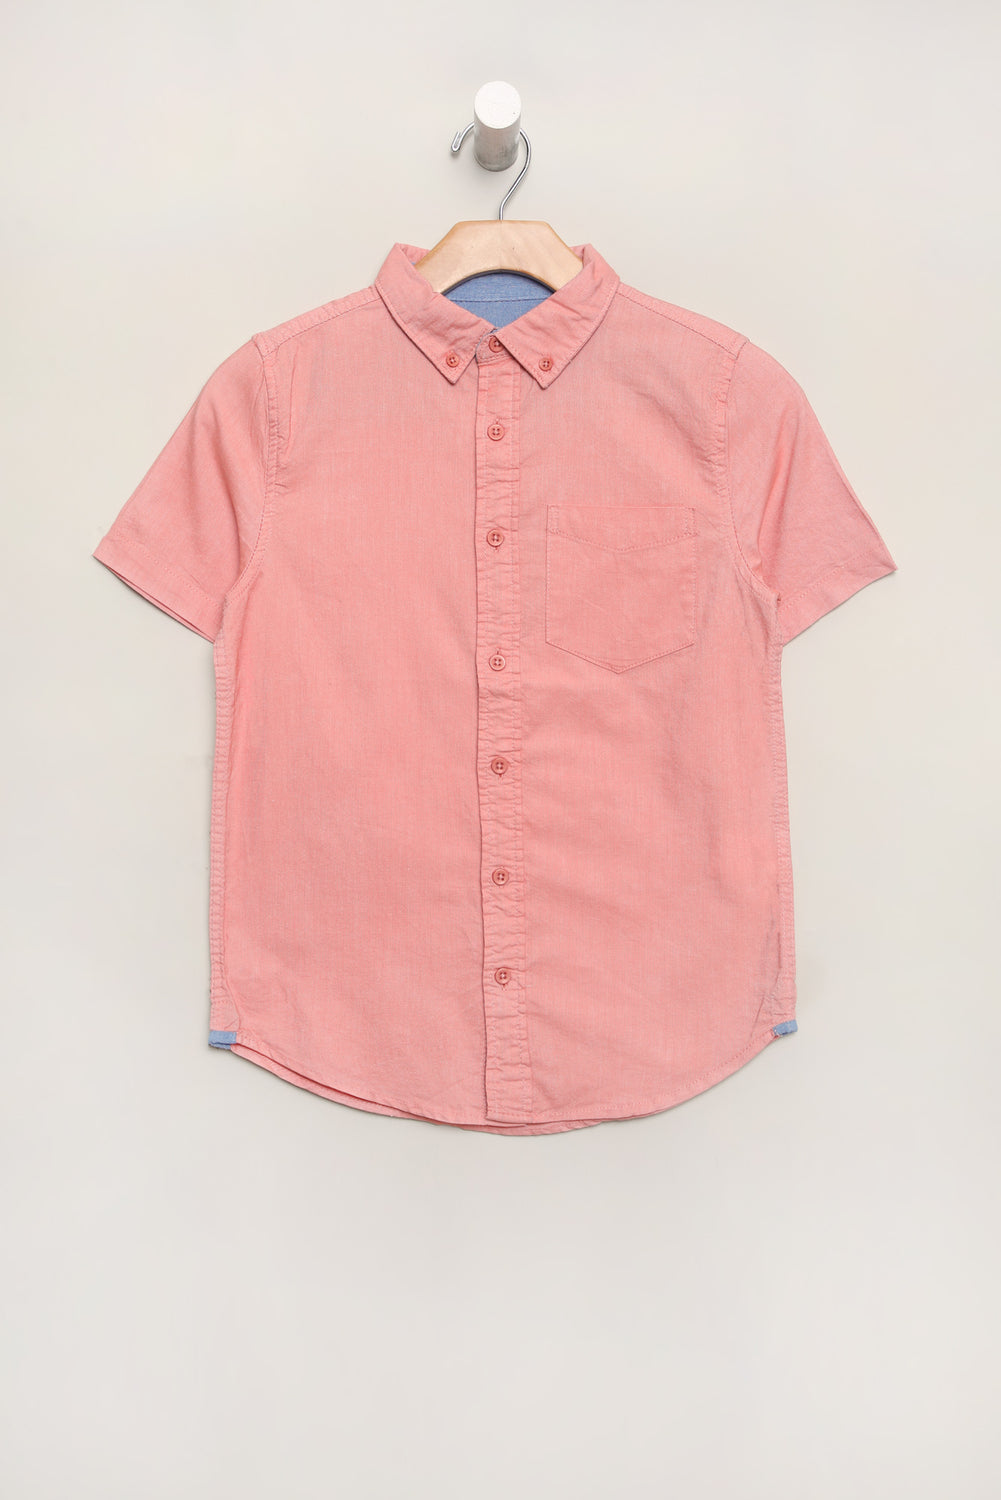 West49 Youth Oxford Button-Up West49 Youth Oxford Button-Up